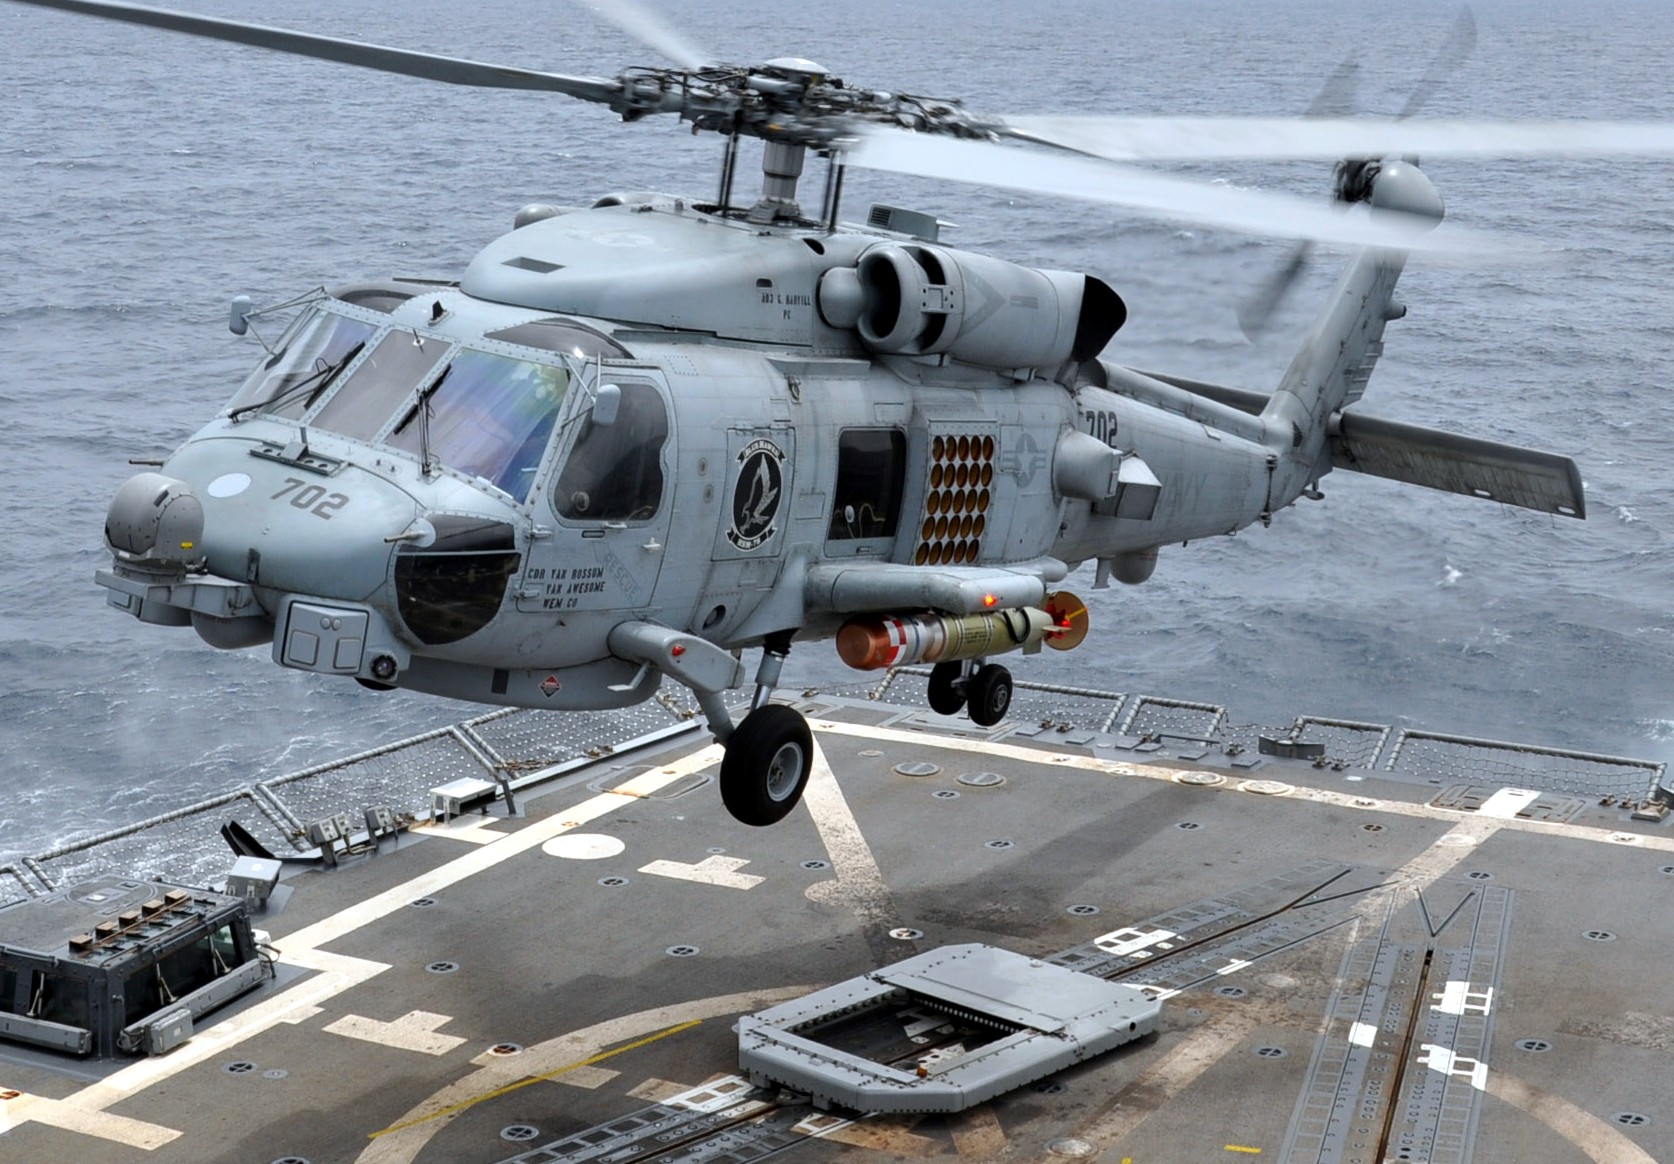 hsm-78 blue hawks helicopter maritime strike squadron mh-60r seahawk us navy 2014 34